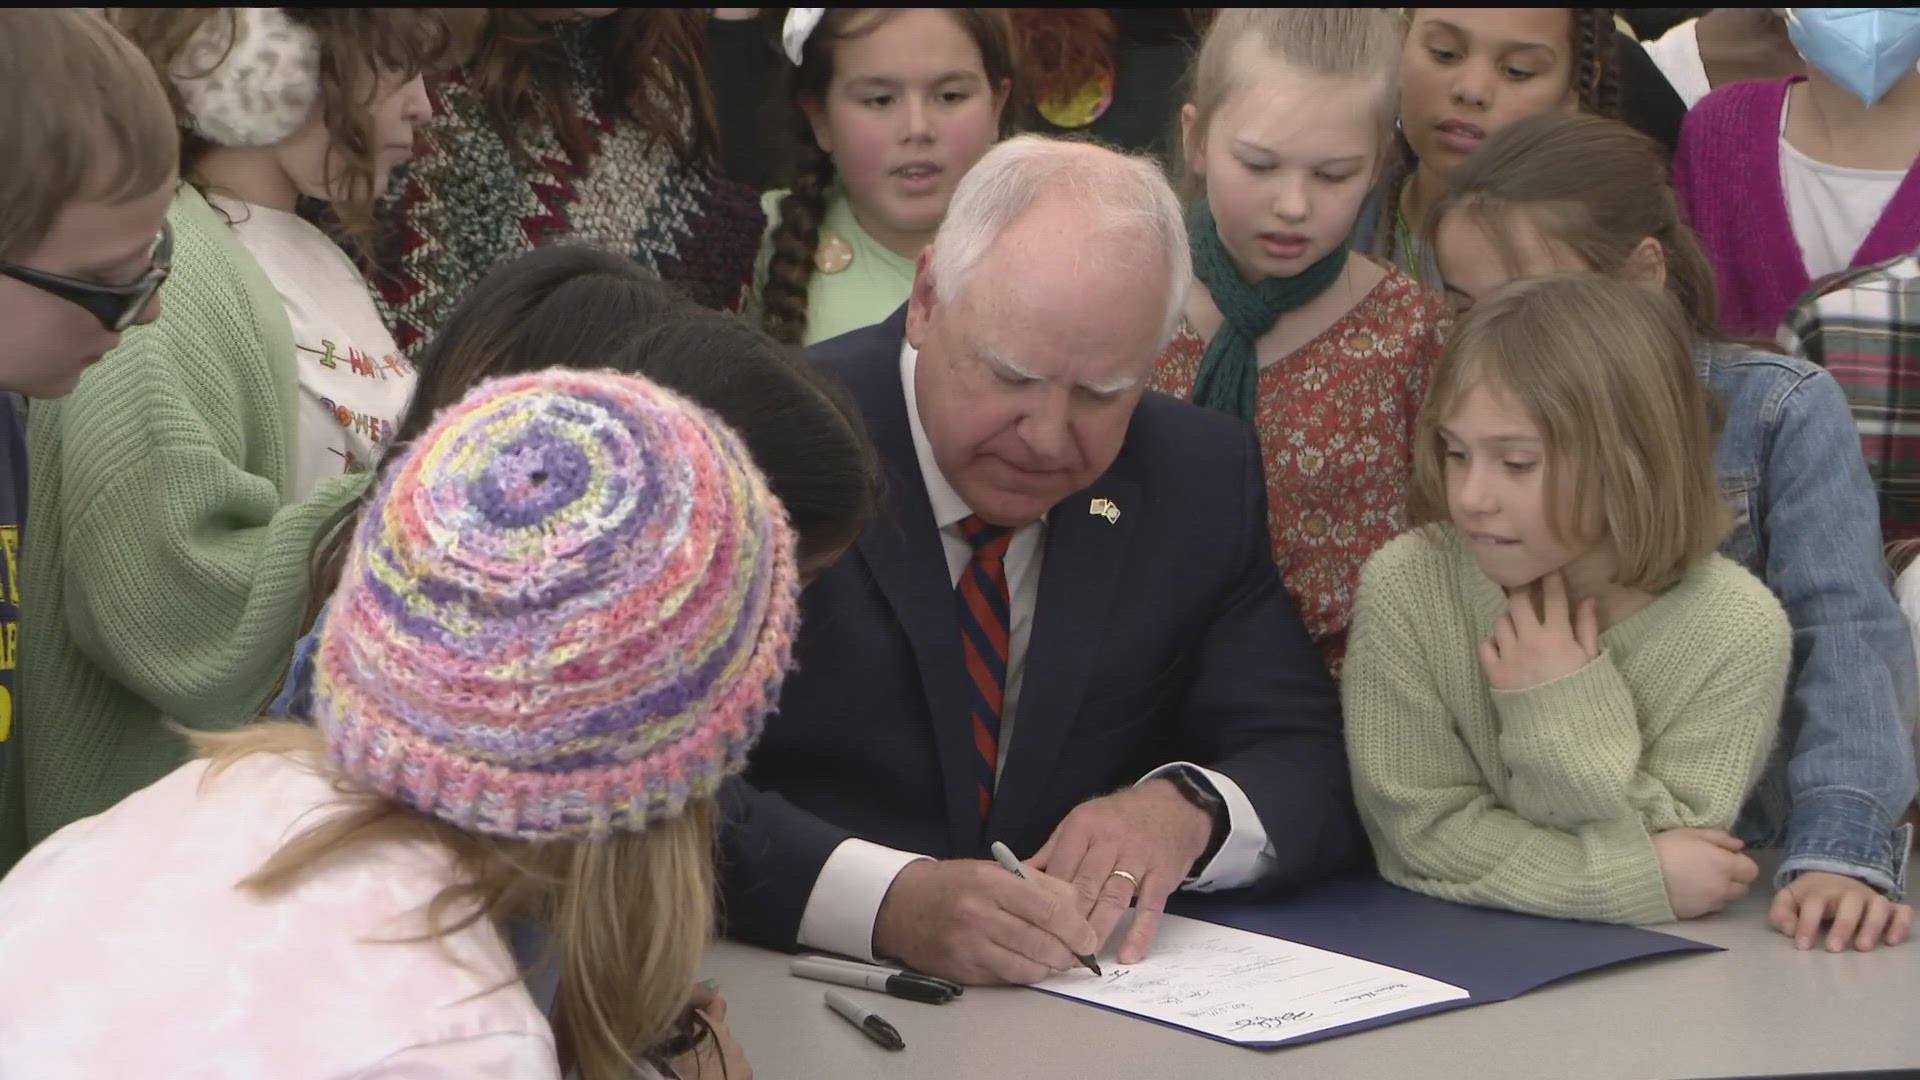 Governor Tim Walz visited Webster Elementary School in Minneapolis on March 17 to sign a bill that will provide Minnesota students with free breakfast and lunch.